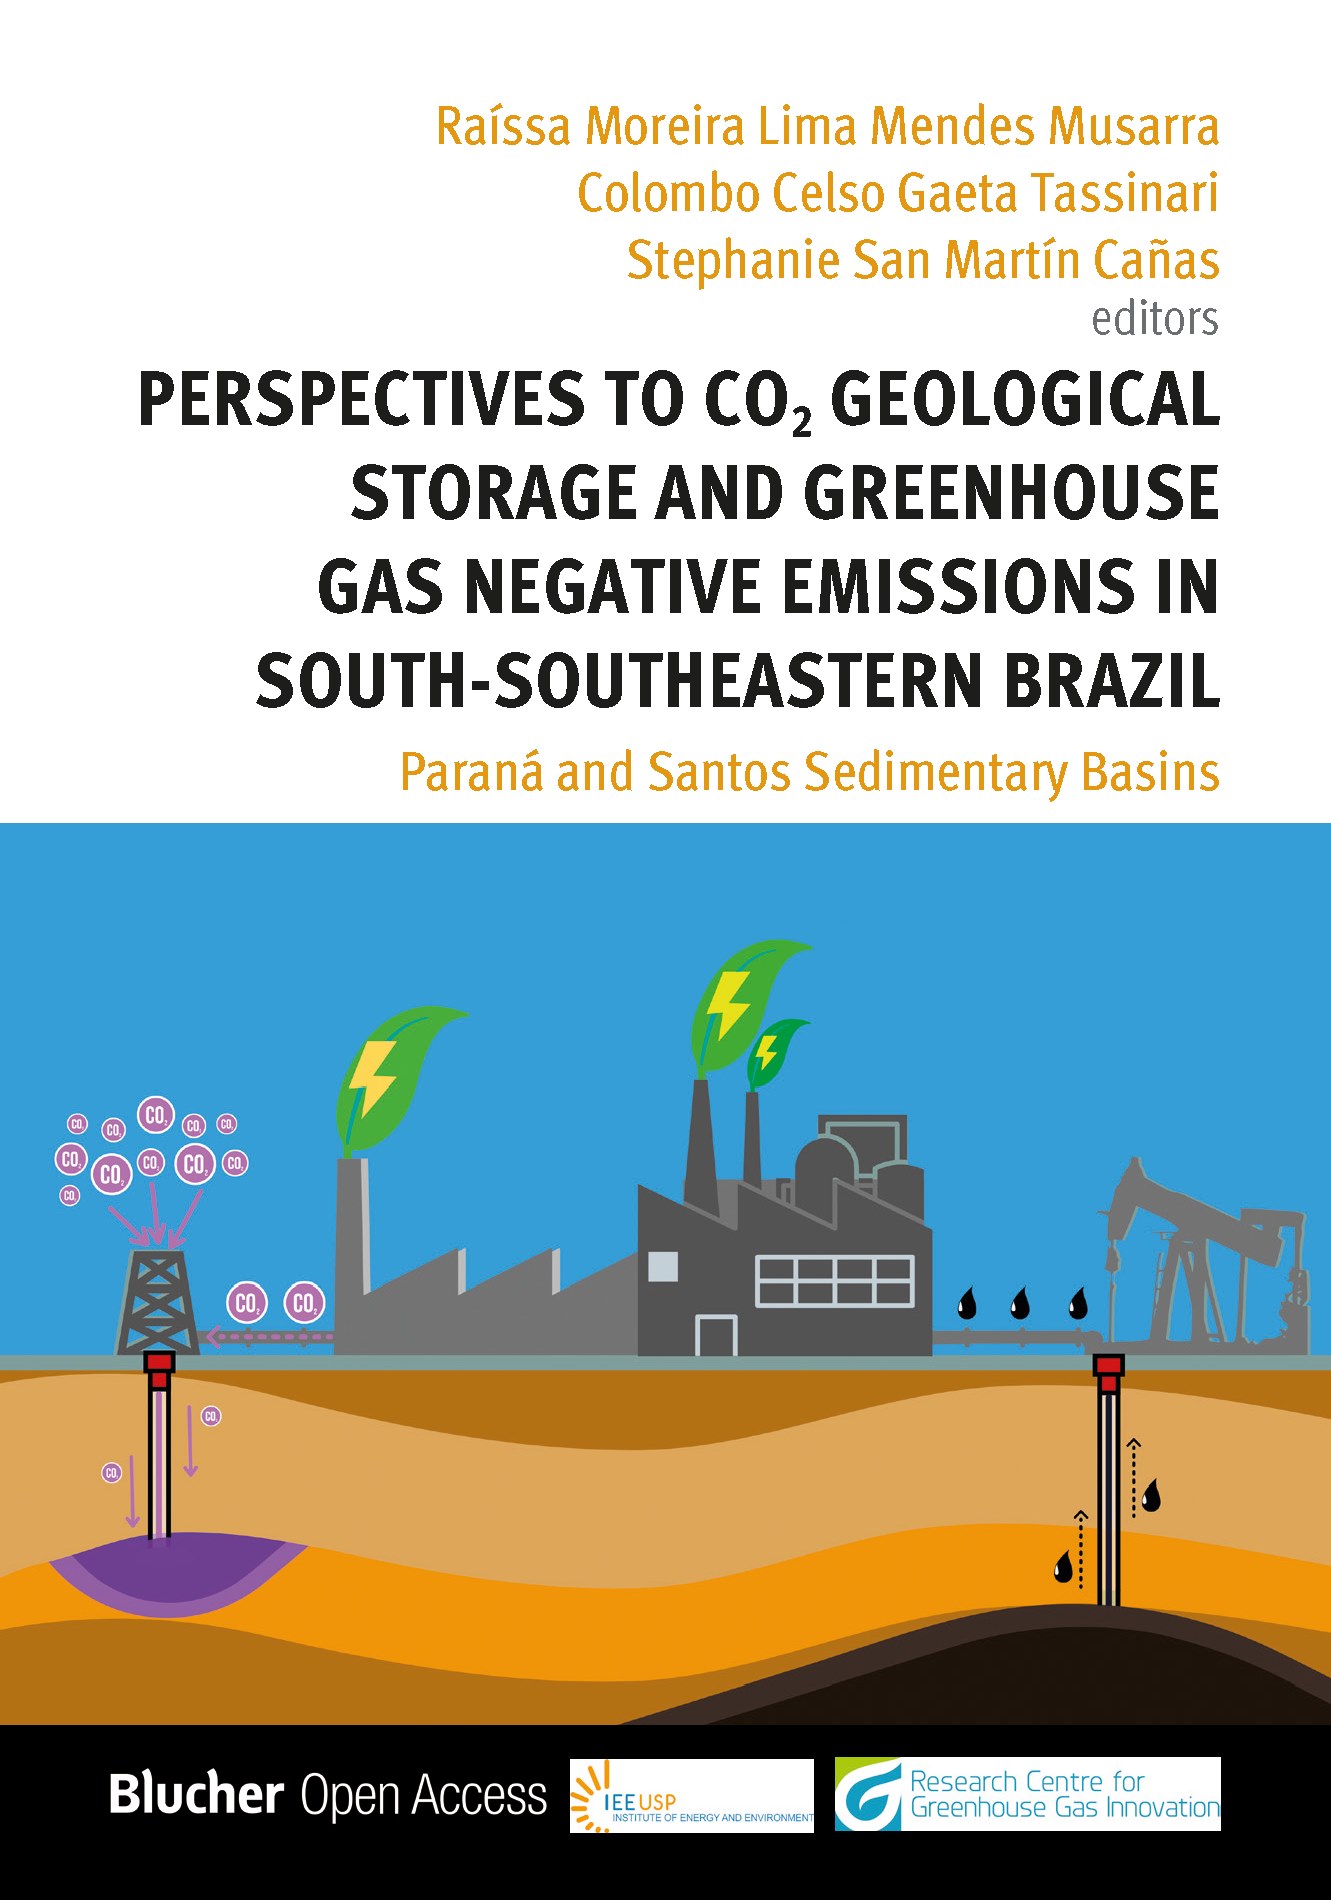 Perspectives to CO2 Geological Storage and Greenhouse Gas Negative Emissions in South-Southeastern Brazil: Paraná and Santos Sedimentary Basins